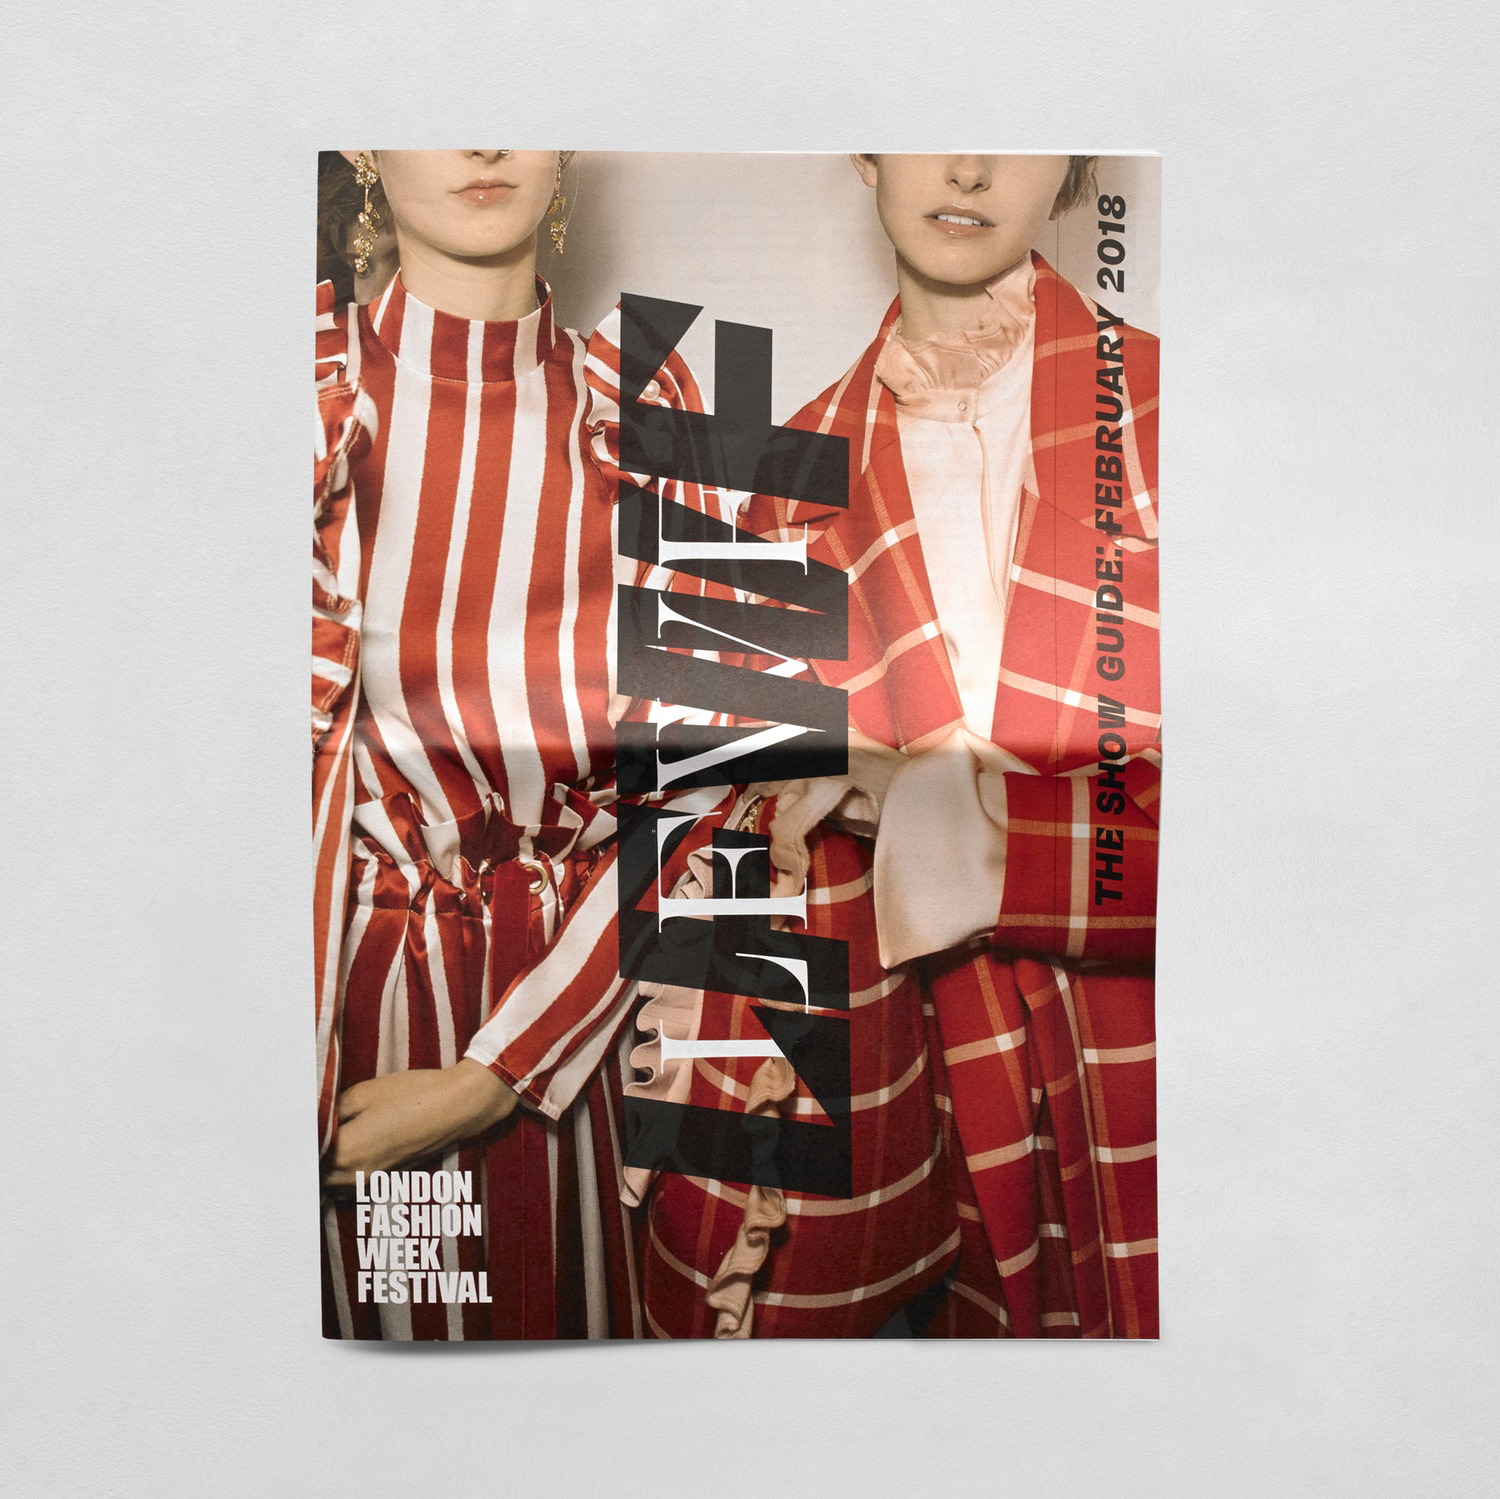 Graphic identity and print for London Fashion Week Festival by Pentagram